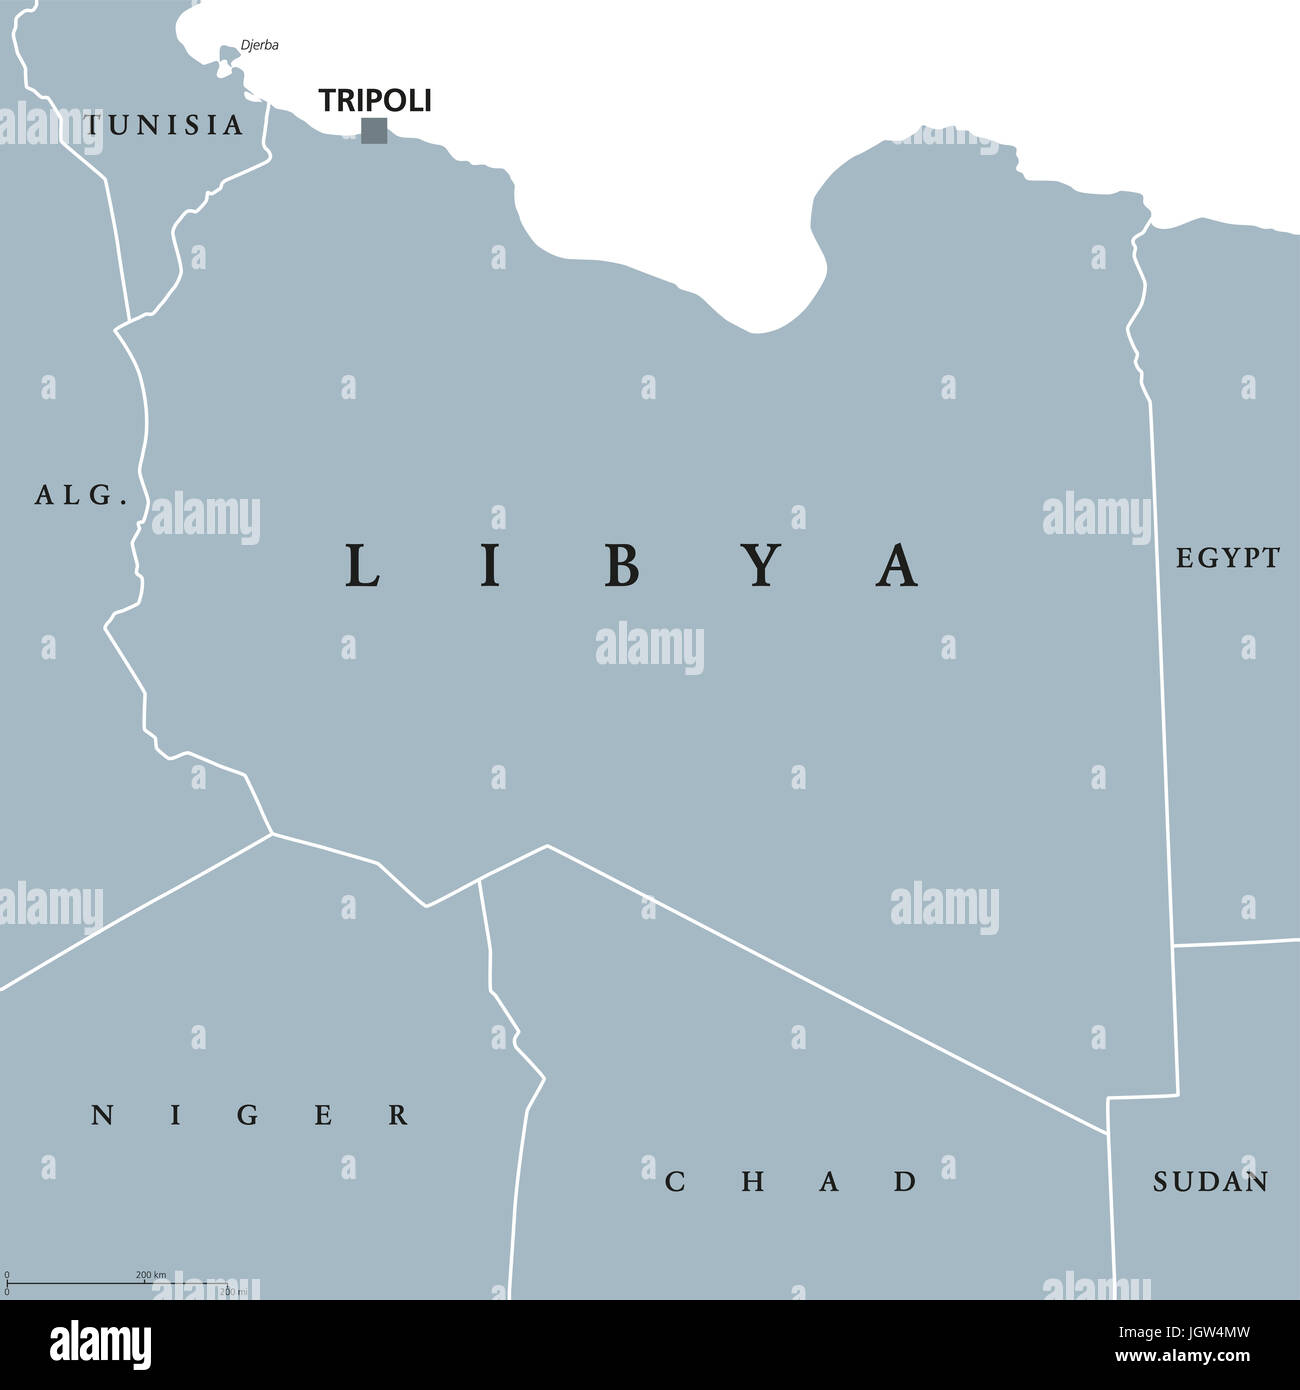 Libya political map with capital Tripoli. Arab country in the Maghreb region of North Africa bordered by the Mediterranean Sea. Gray illustration. Stock Photo